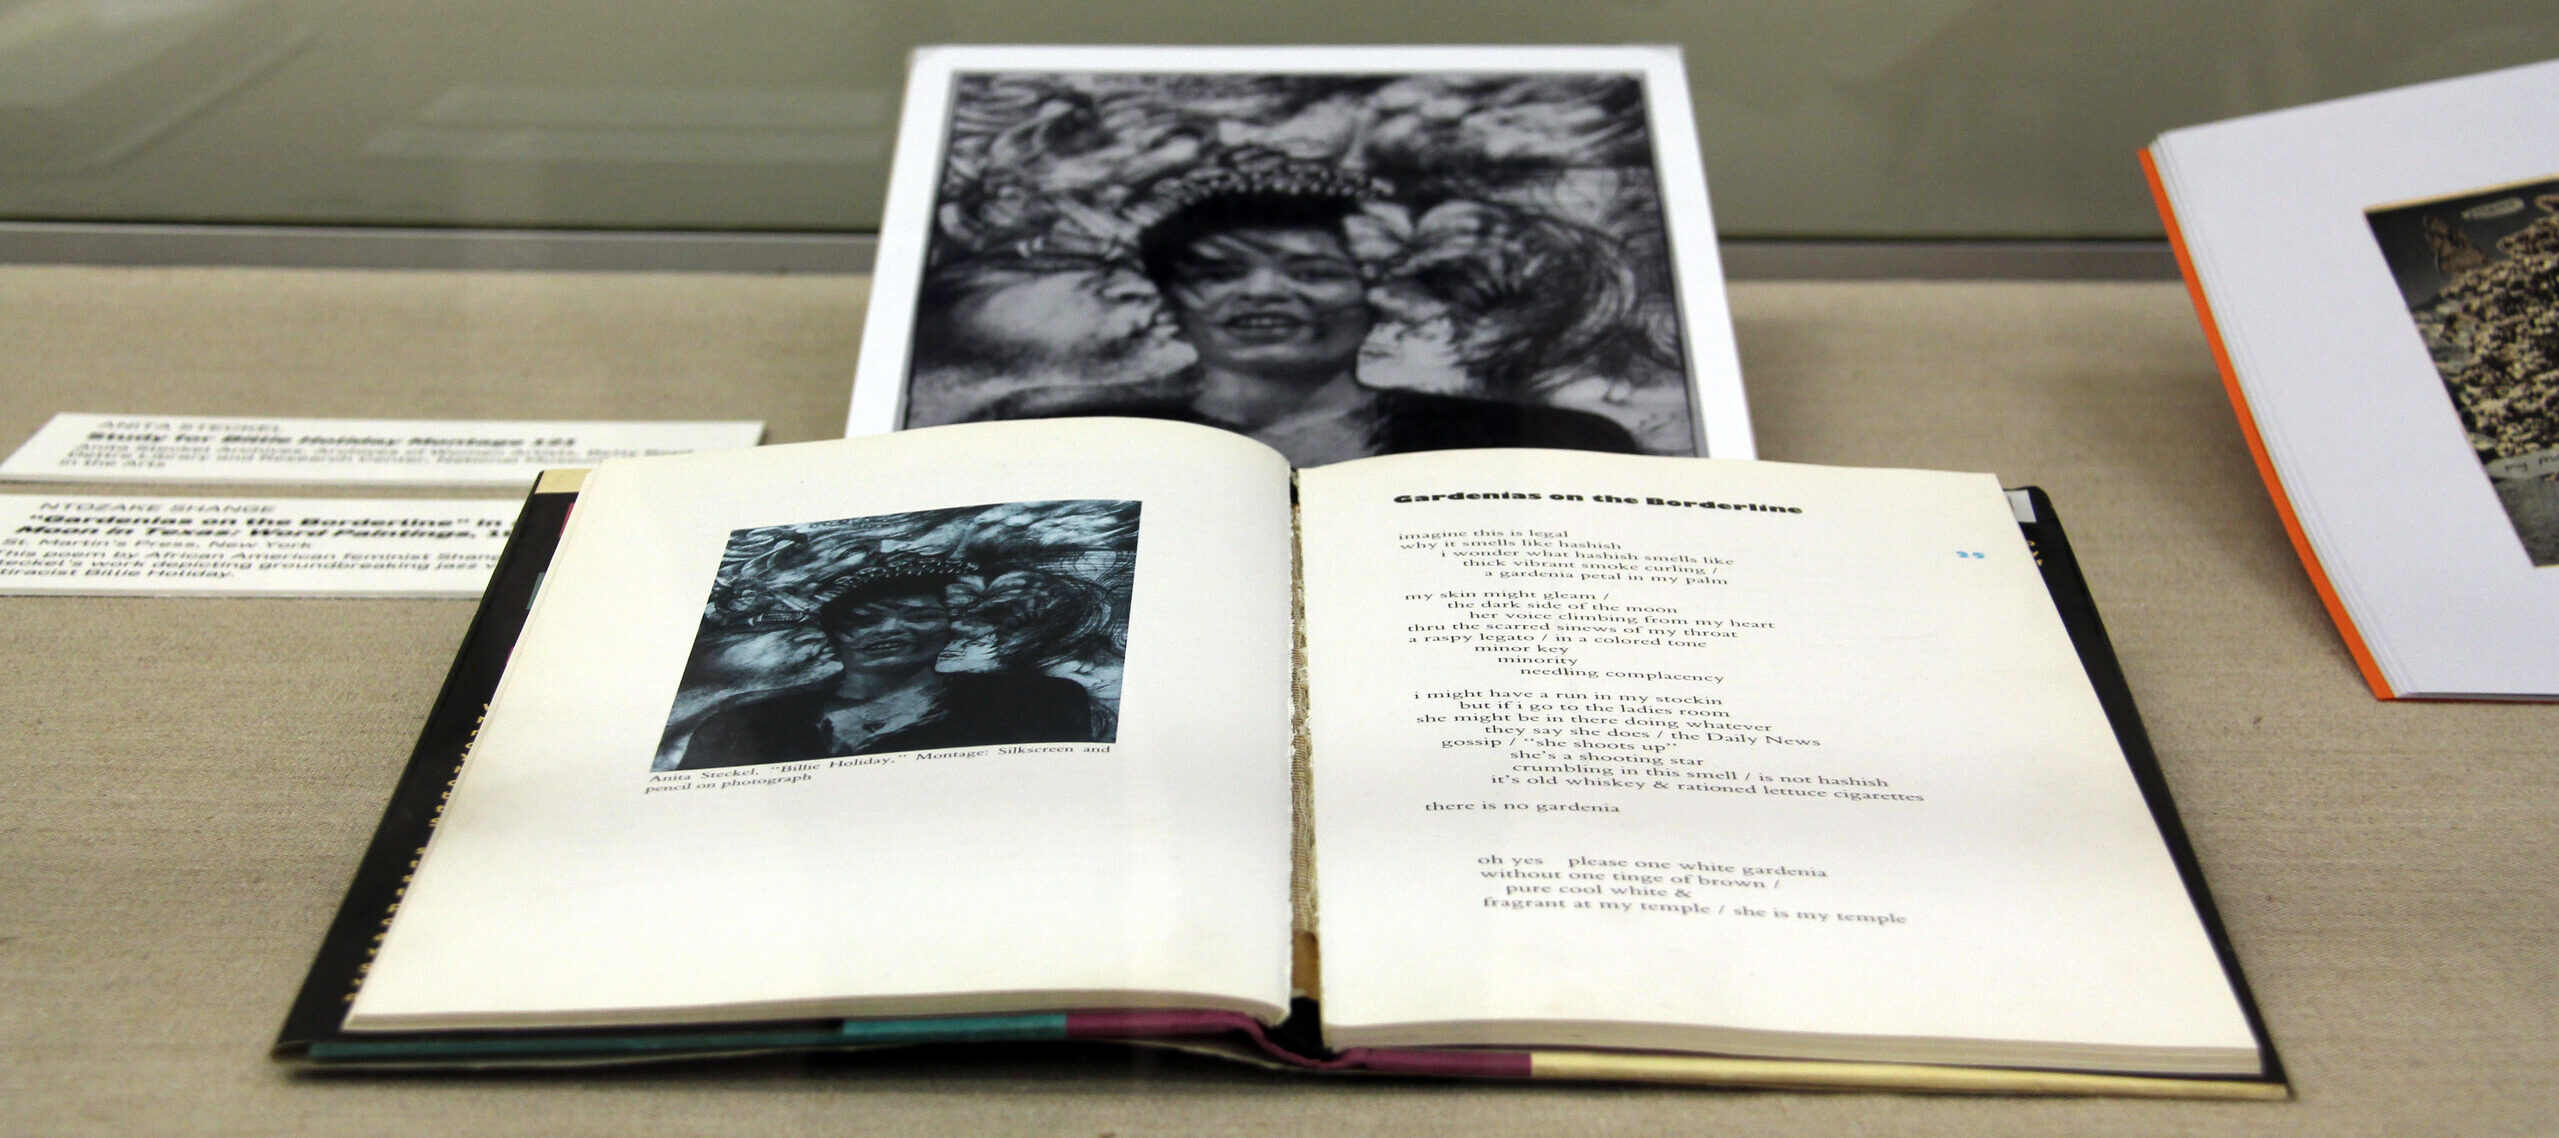 A book is lying in a glass case. The book shows text and a black-and-white photographic portrait of a woman's face.